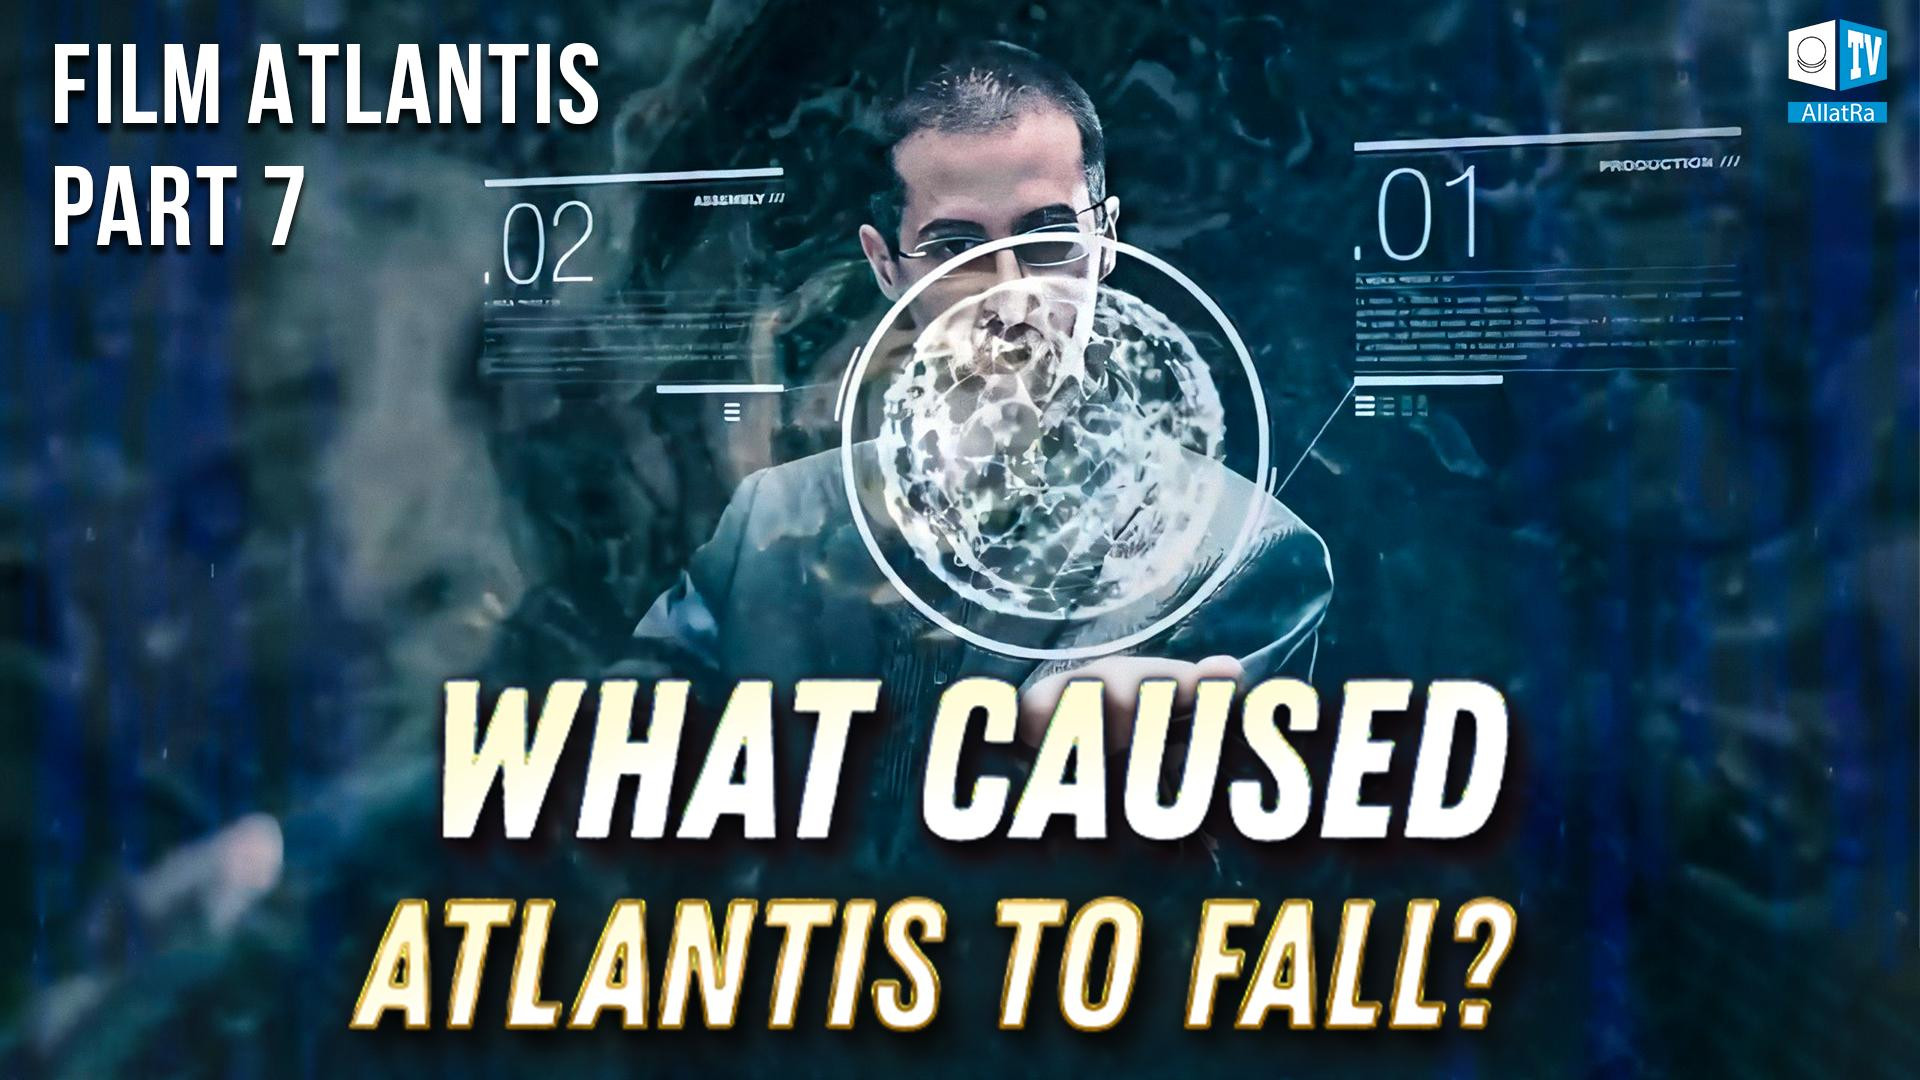 Atlantis: Evidence of a Highly Advanced Human Civilization of the Past